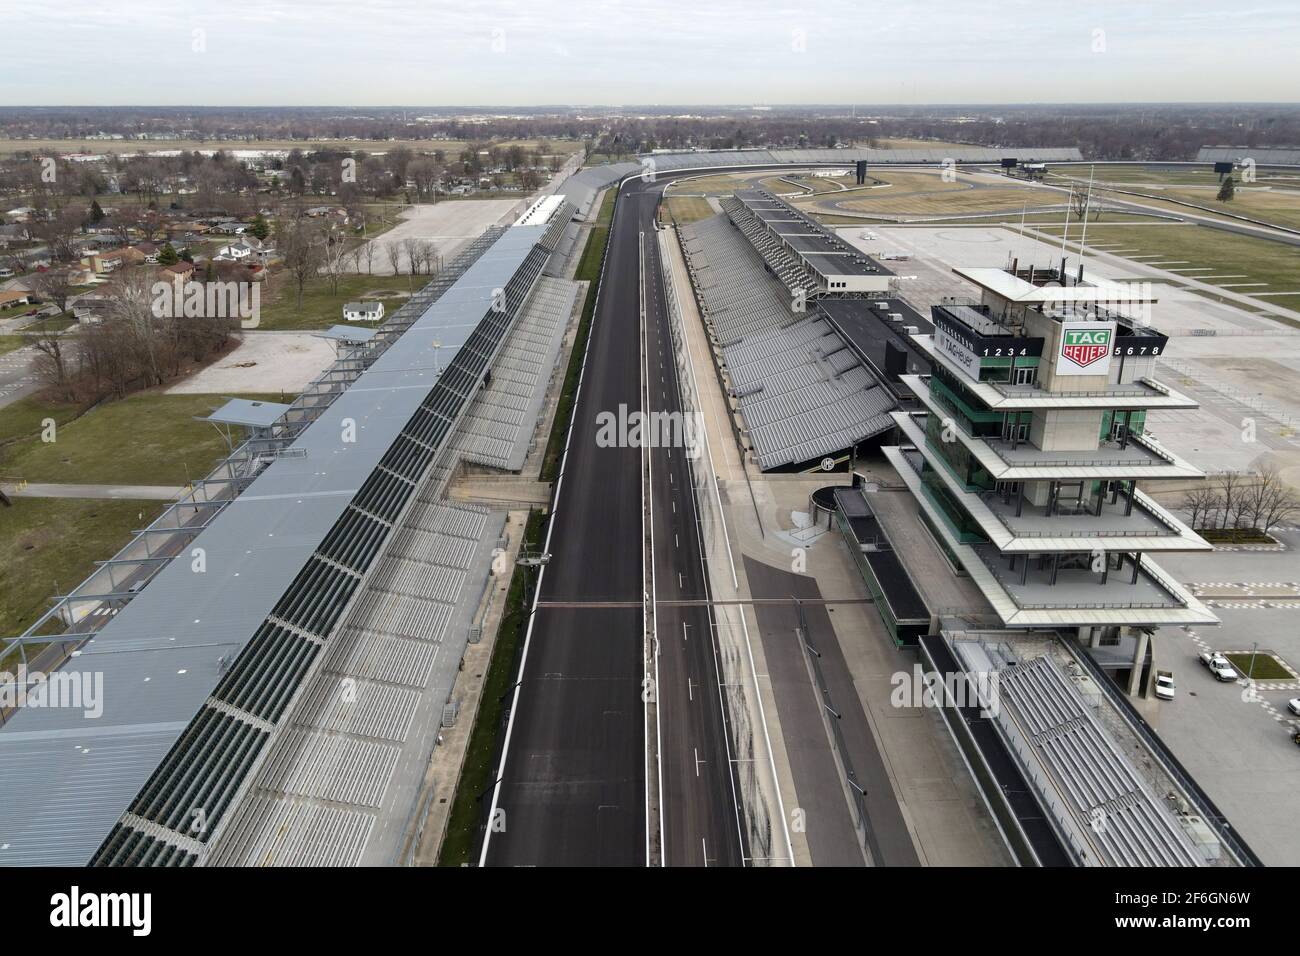 An aerial view of the finish line and Panasonic Pagoda at the Indianapolis Motor Speedway, Monday, March 22, 2021, in Speedway, Ind. It is the home of Stock Photo